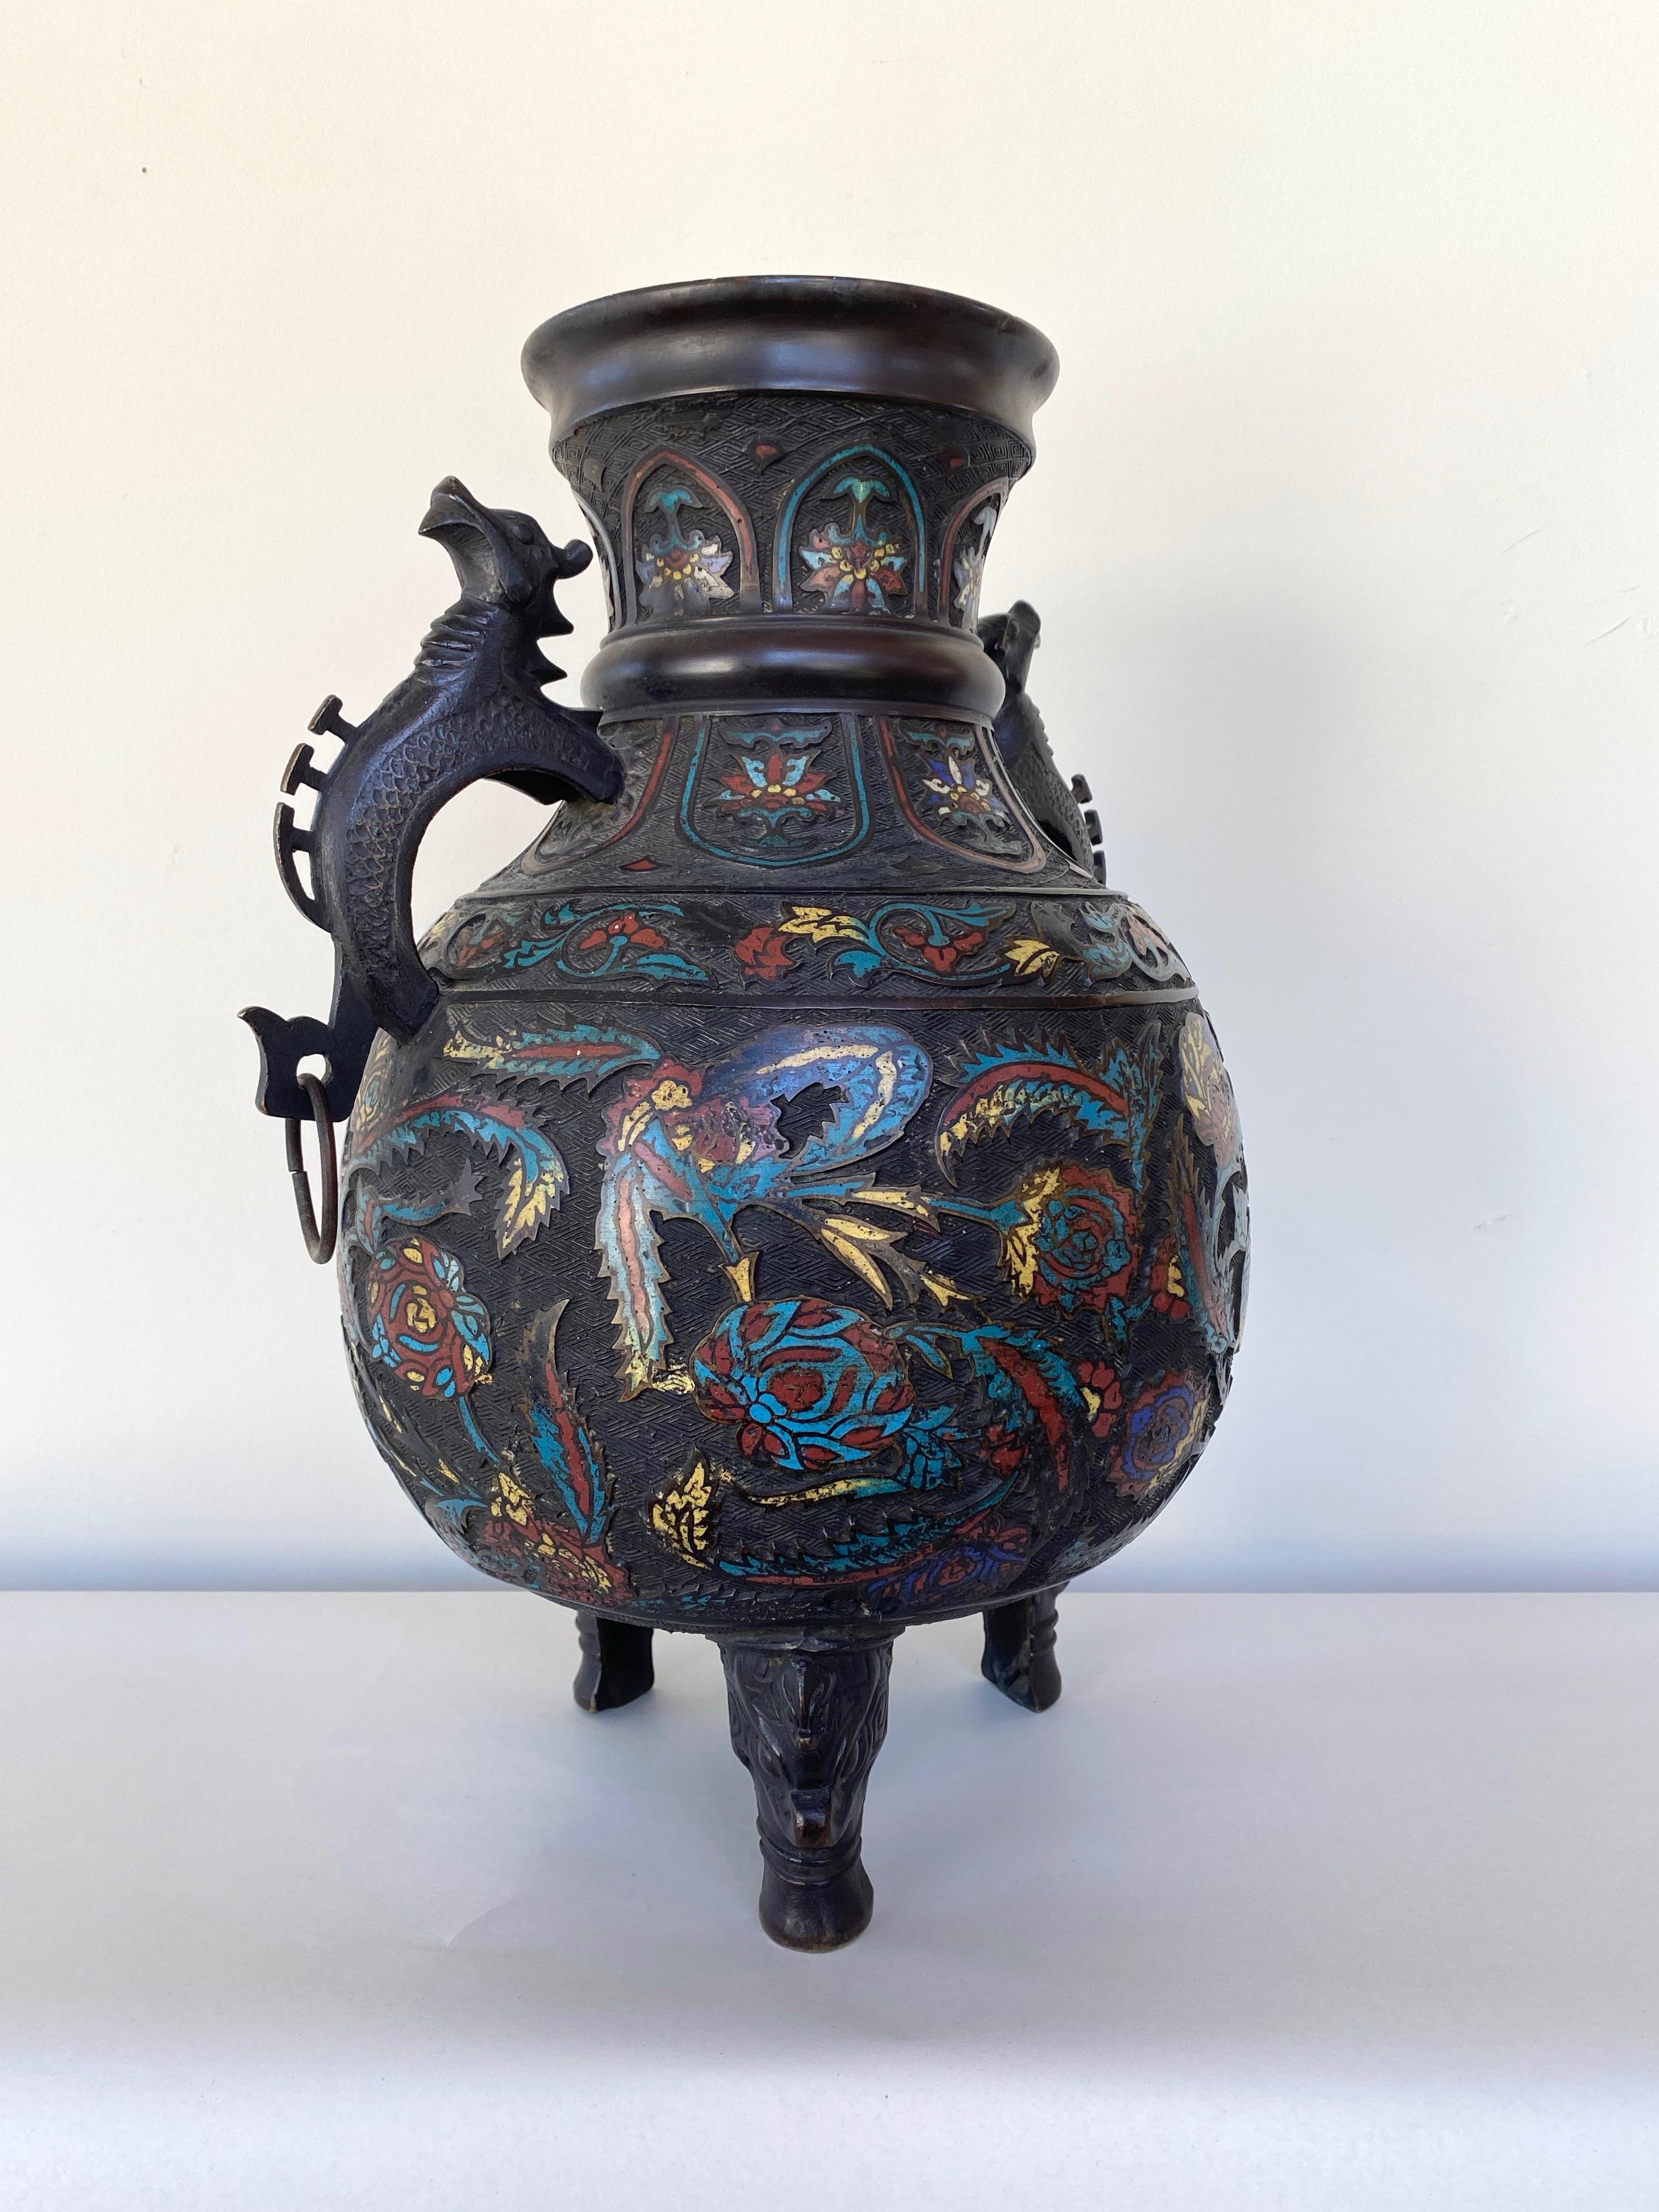 19th Century Large Chinese Qing Dynasty Bronze Cloisonné Urn with Dragon Handles, 19th C.